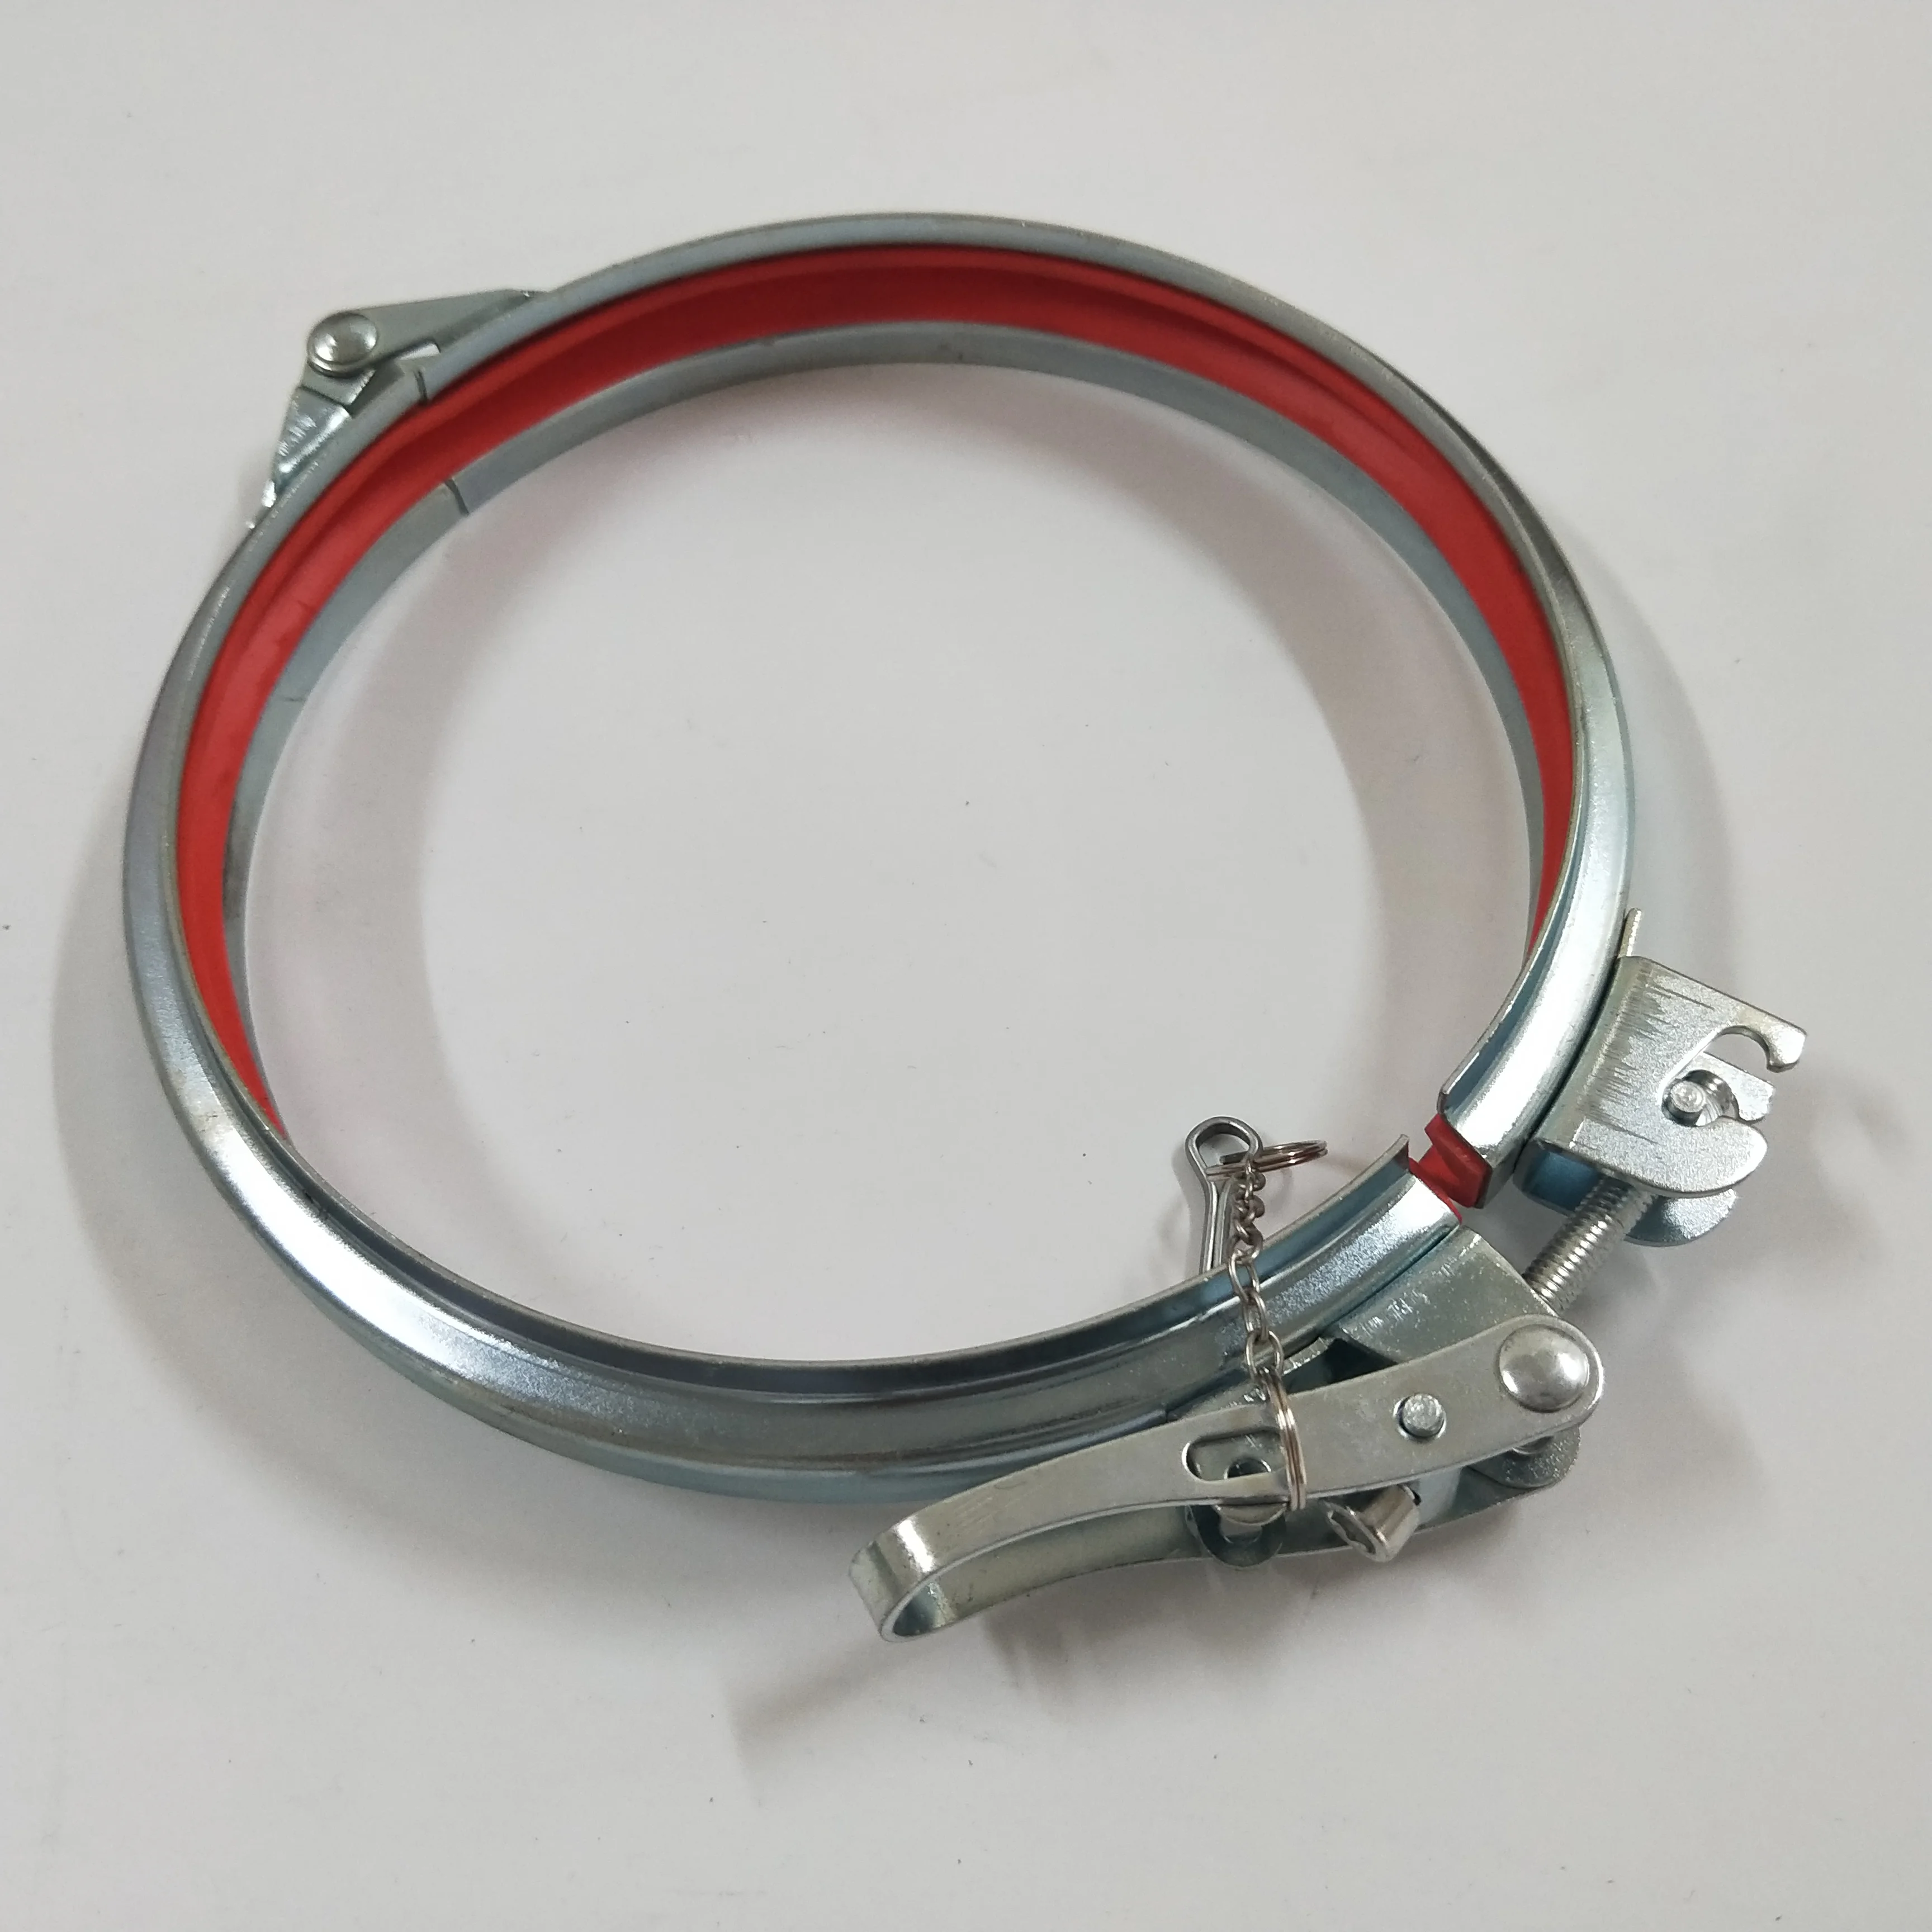 astronomie Gezag visie Source high quality China galvanized quick release lever lock ring on  m.alibaba.com